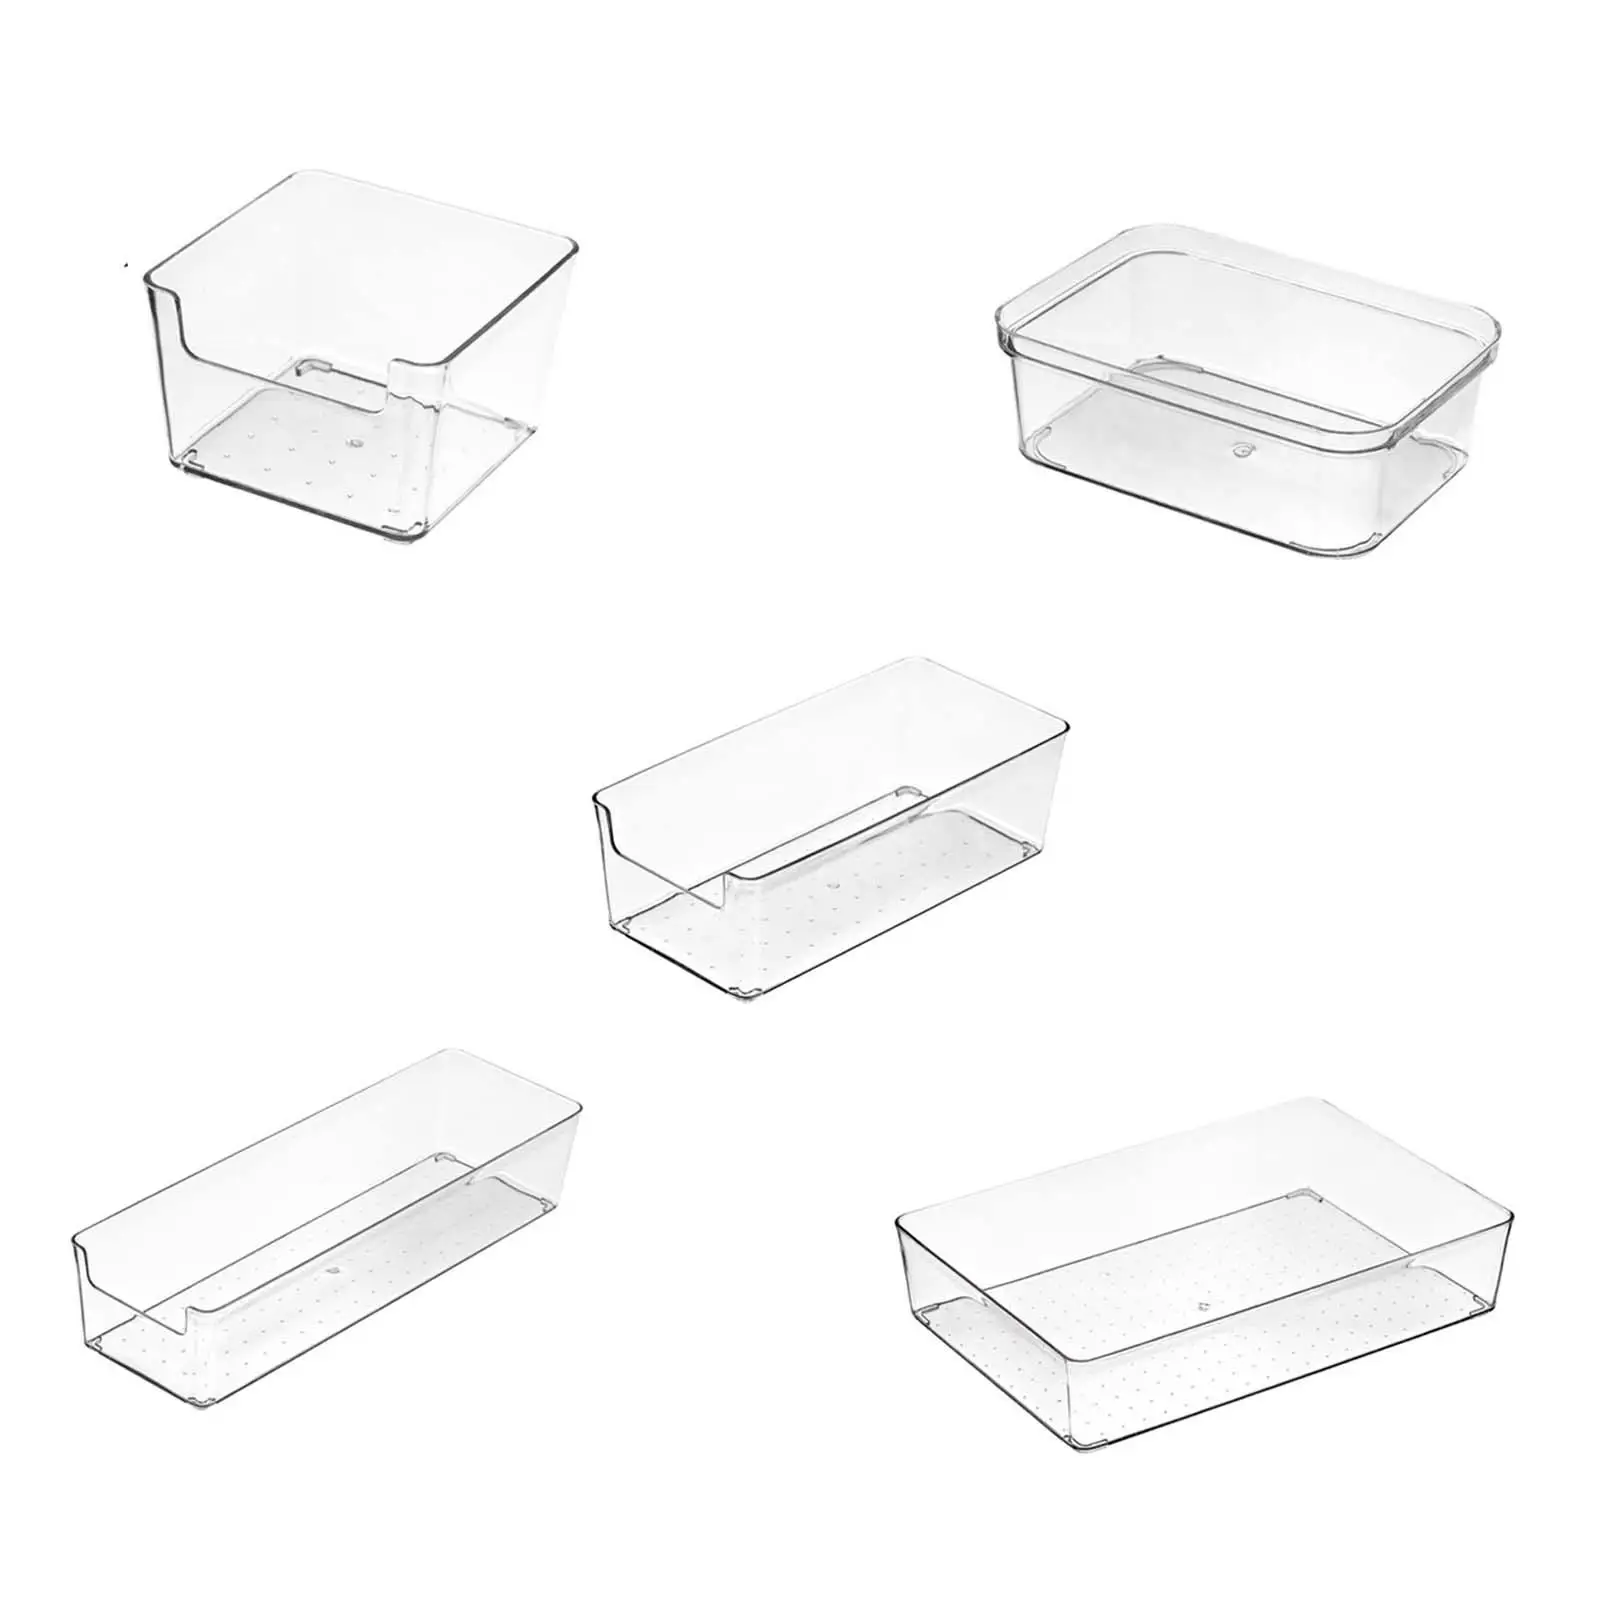 5x Divider Drawer Storage Box Table Stationery Makeup Caddy Bin Multi Sizes Transparent for Shelf Jewelry Home Serving Utensils